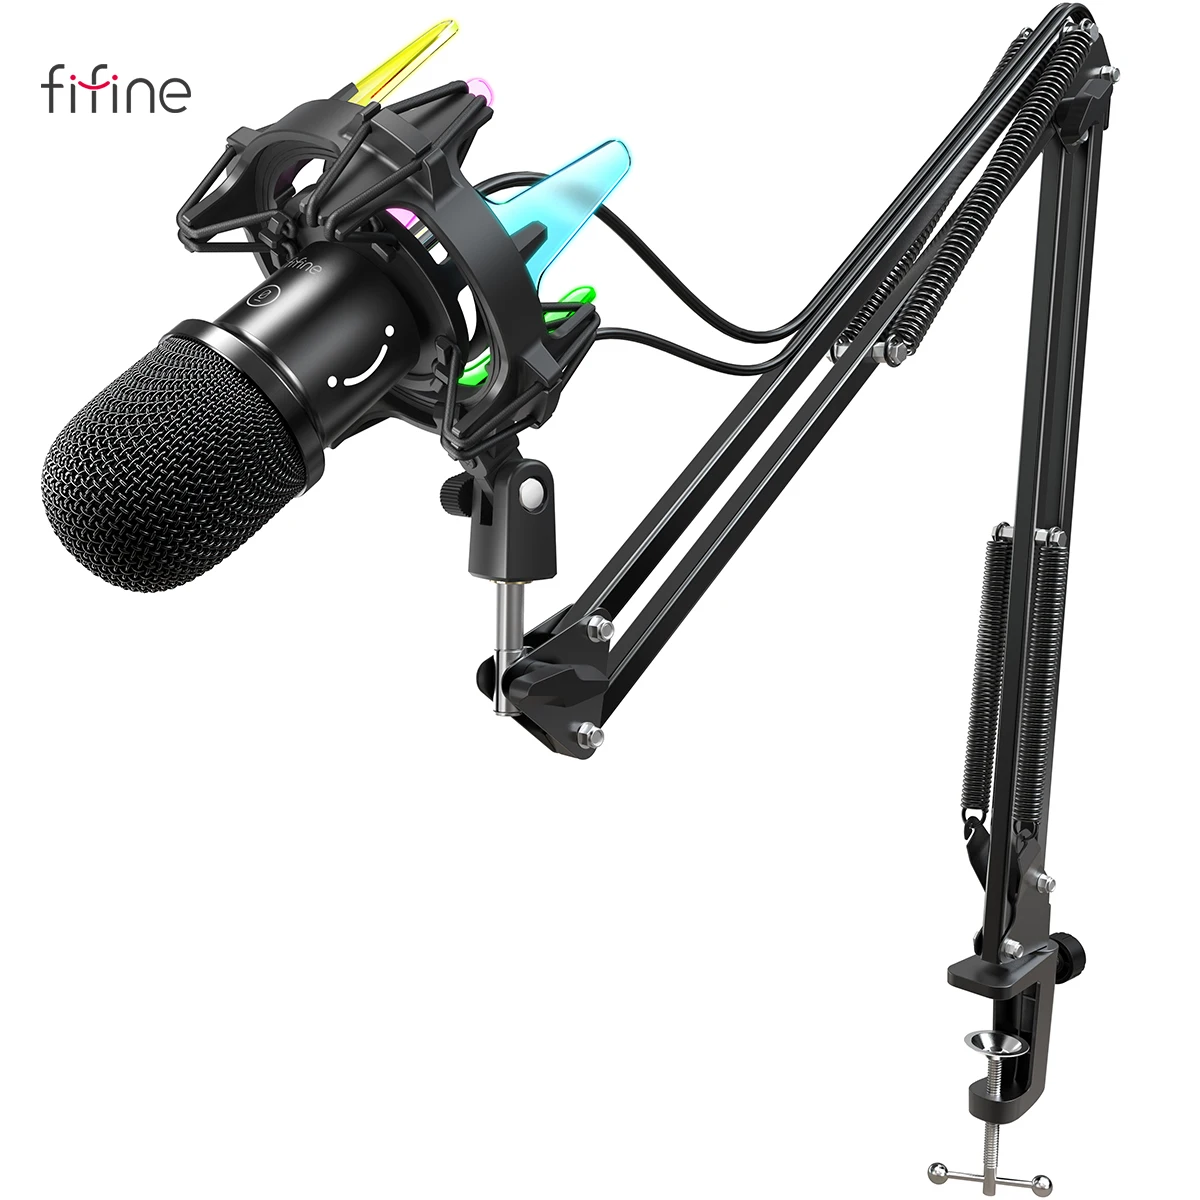 FIFINE USB Dynamic Microphone Kit with Boom Arm,RGB Shock Mount,Cardioid Mic Set for Game Podcast Stream for PC PS4 PS5-K651